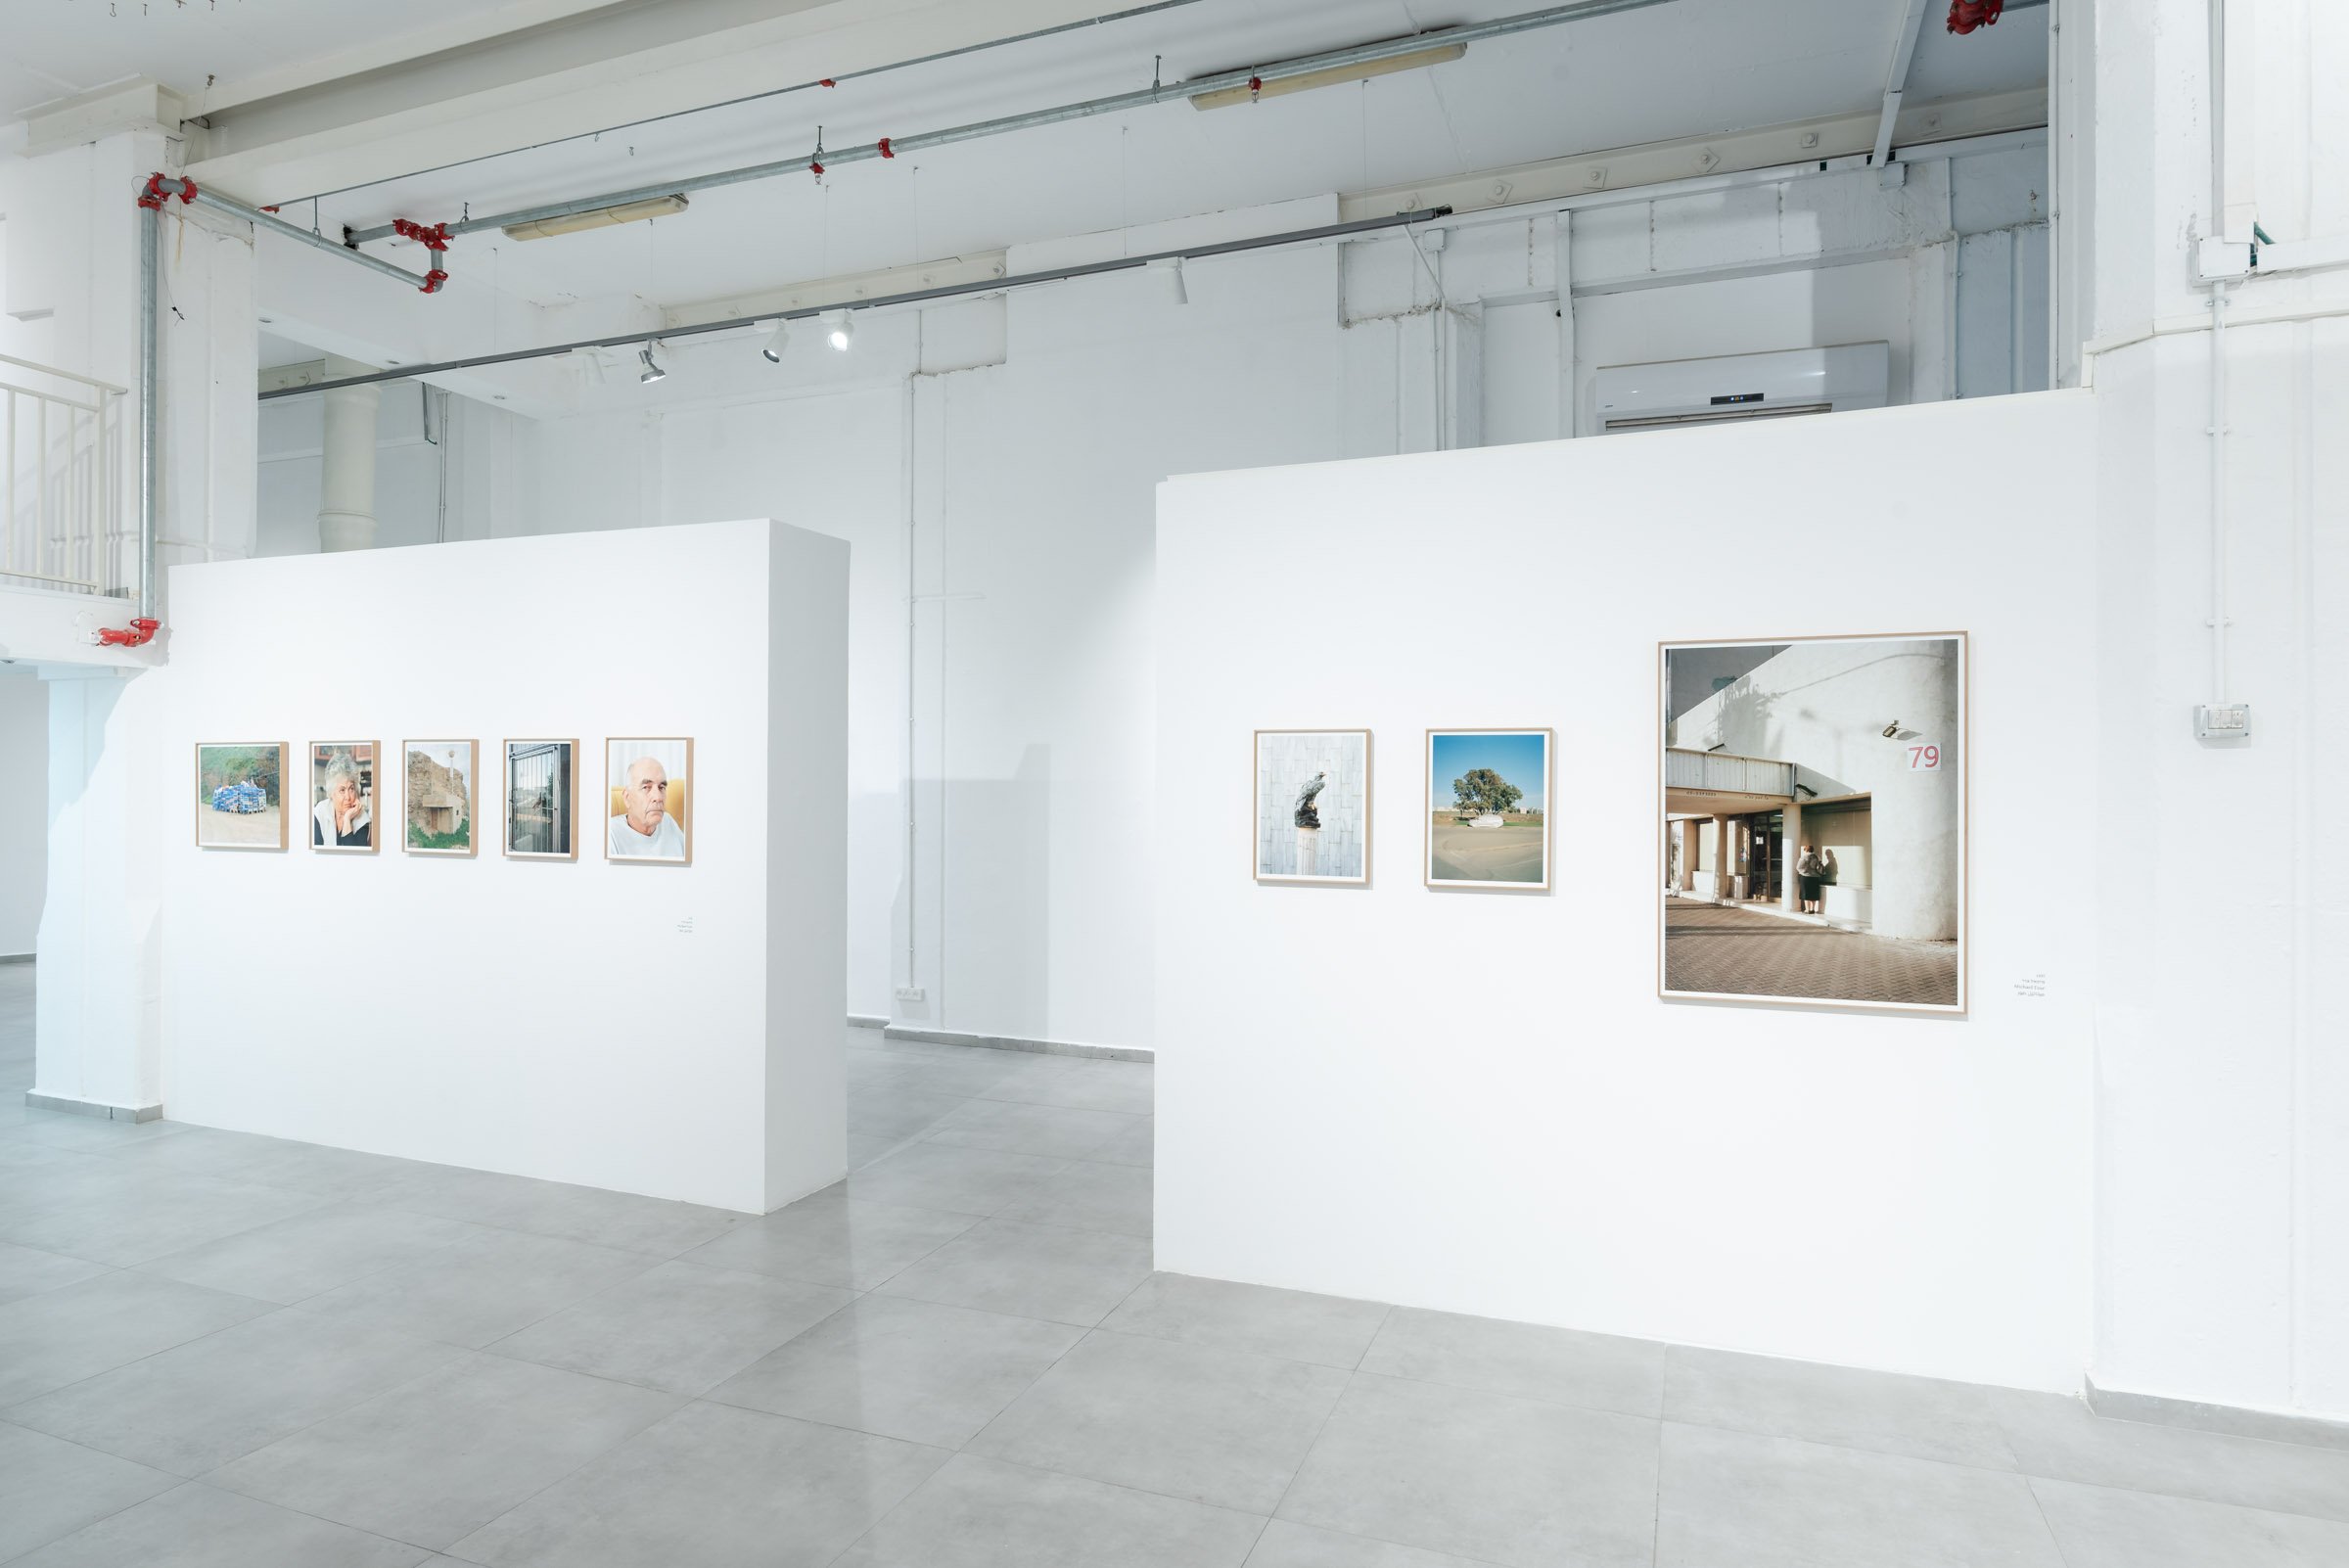 Bezalel Photography Department Final Exhibition at The New Gallery Teddy, Jerusalem, Israel.